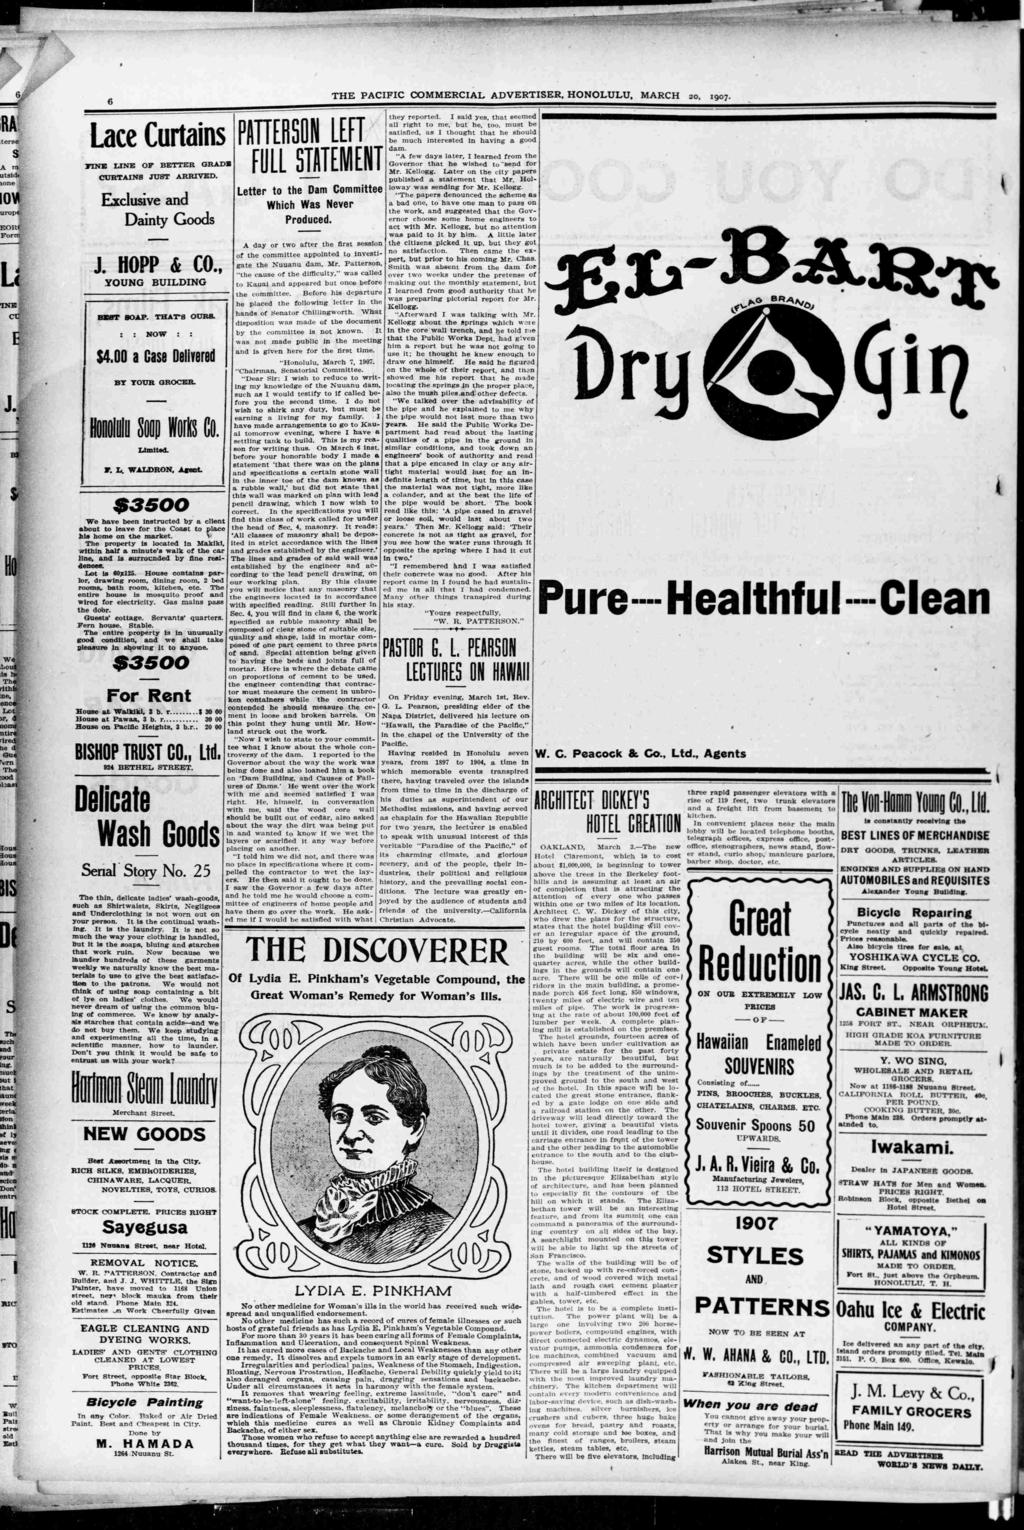 THE PACFC COMMERCAL ADVERTSER, HONOLULU, MARCH 20, 907 Bl V ace Curtans T EHSUB Ltr dam JTNE LNE OF BETTER GRADE CURTANS JUST ARRVED Exclusve and Danty Goods FULL STATEMLN they reported sad yes, that